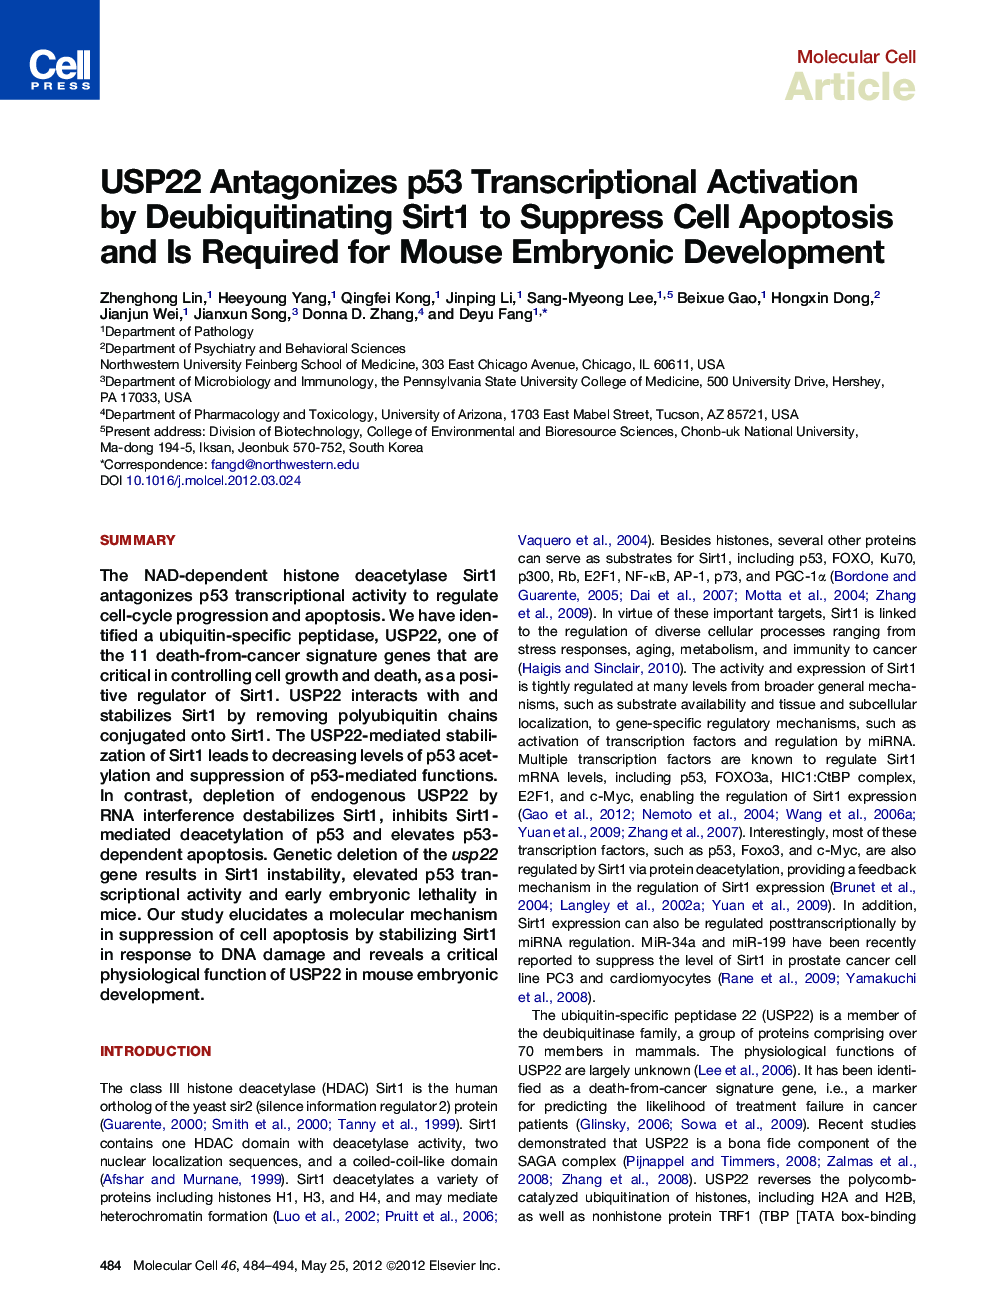 USP22 Antagonizes p53 Transcriptional Activation by Deubiquitinating Sirt1 to Suppress Cell Apoptosis and Is Required for Mouse Embryonic Development